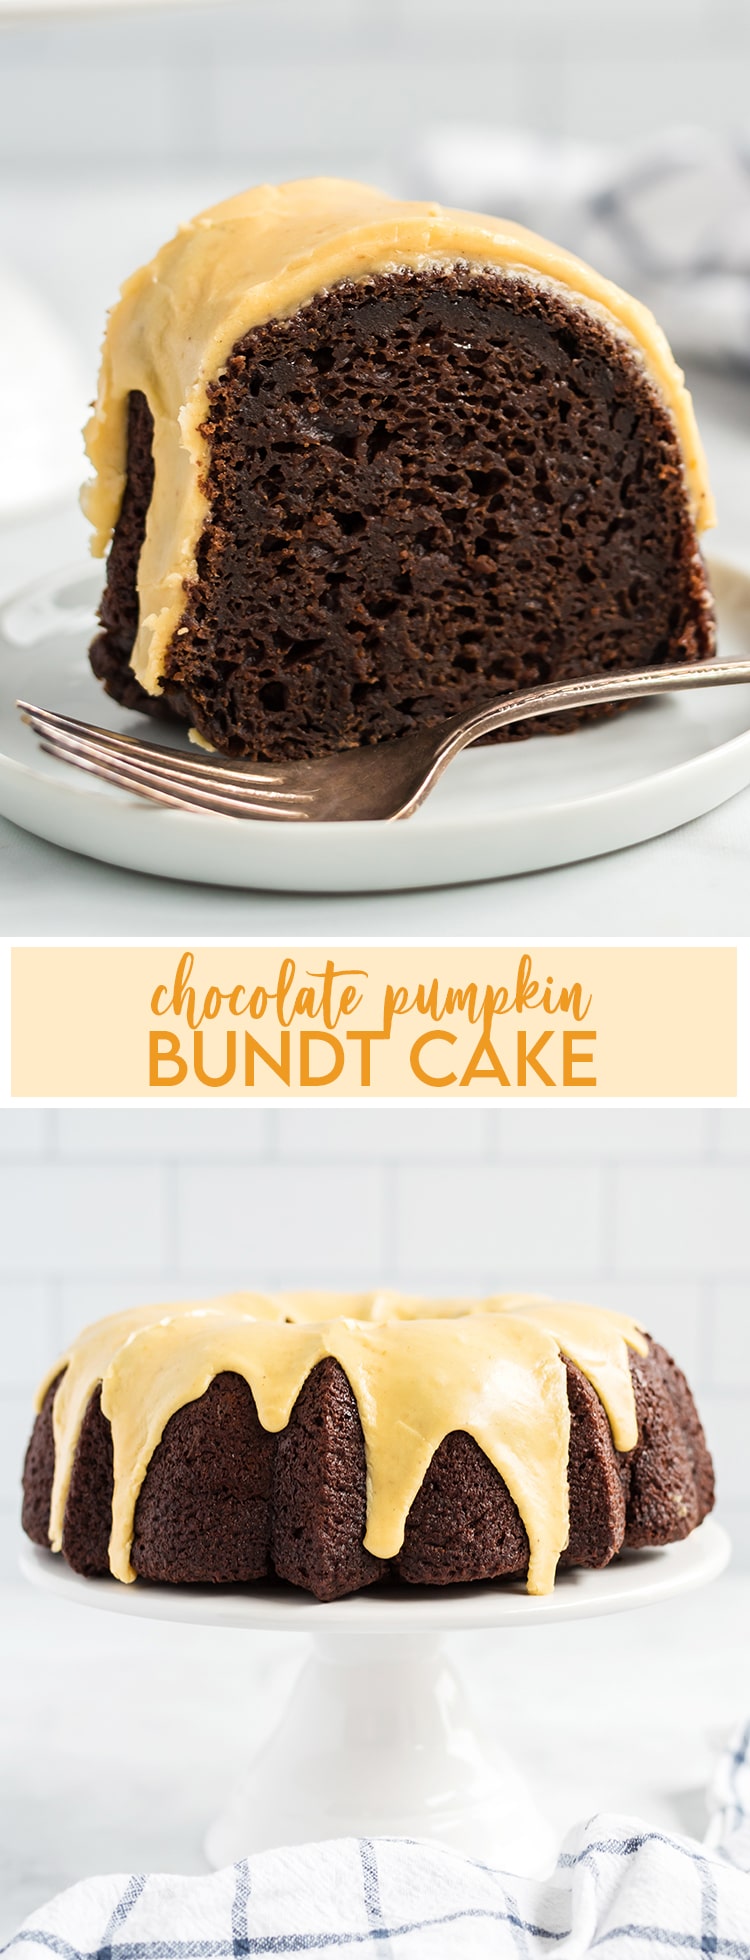 Collage of two photos of Chocolate Pumpkin Bundt Cake with text overlay in the middle.